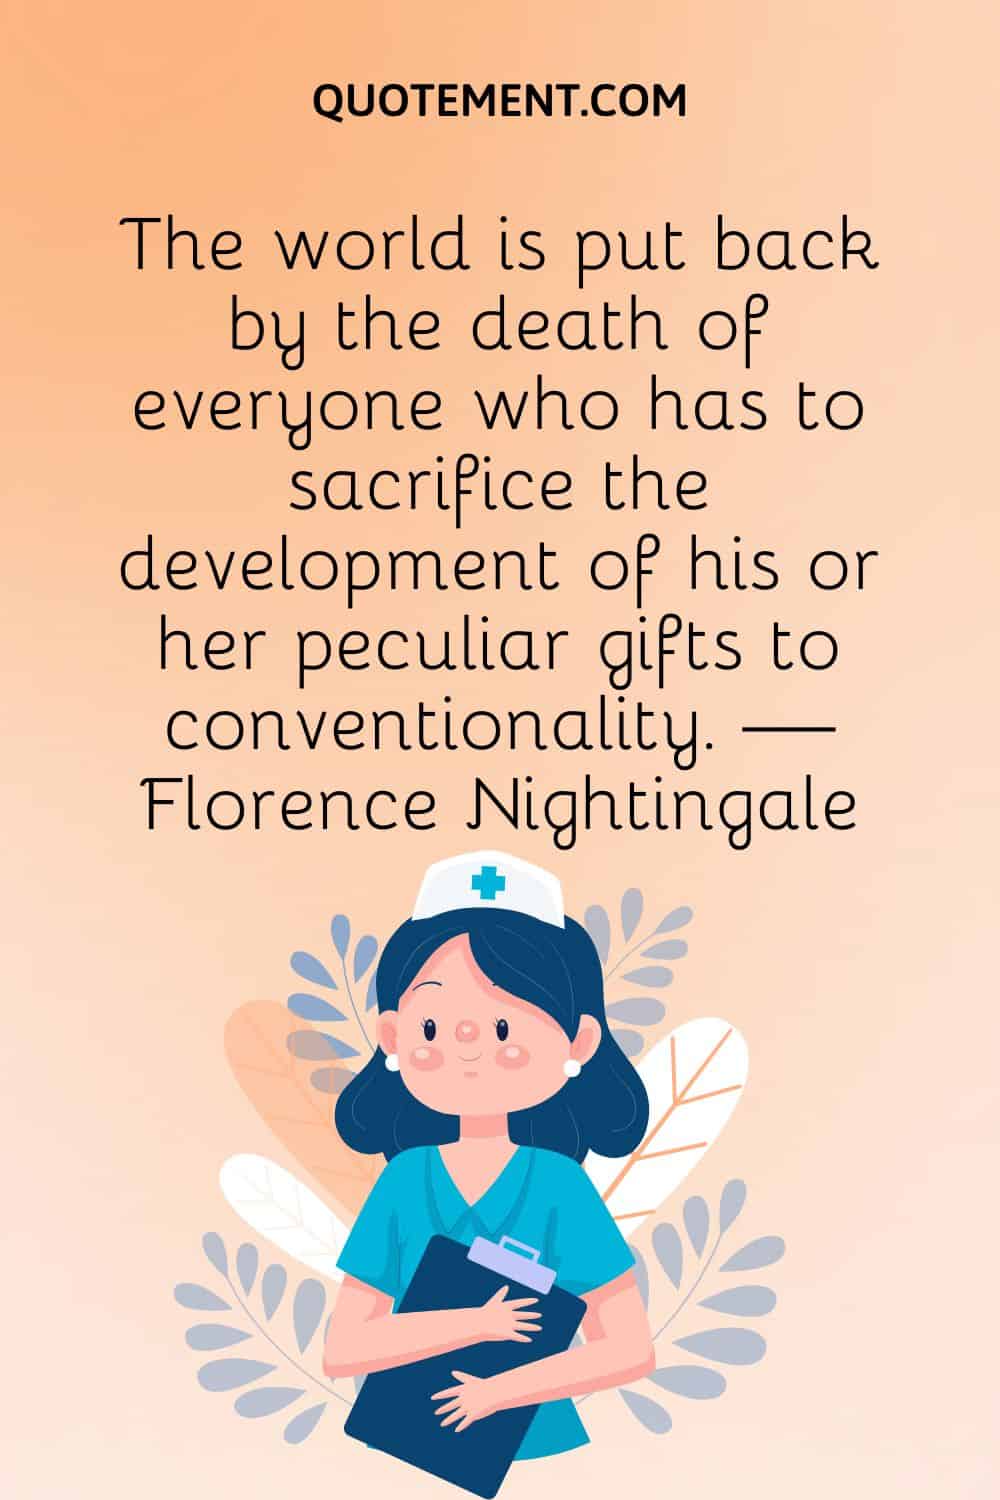 The world is put back by the death of everyone who has to sacrifice the development of his or her peculiar gifts to conventionality. — Florence Nightingale